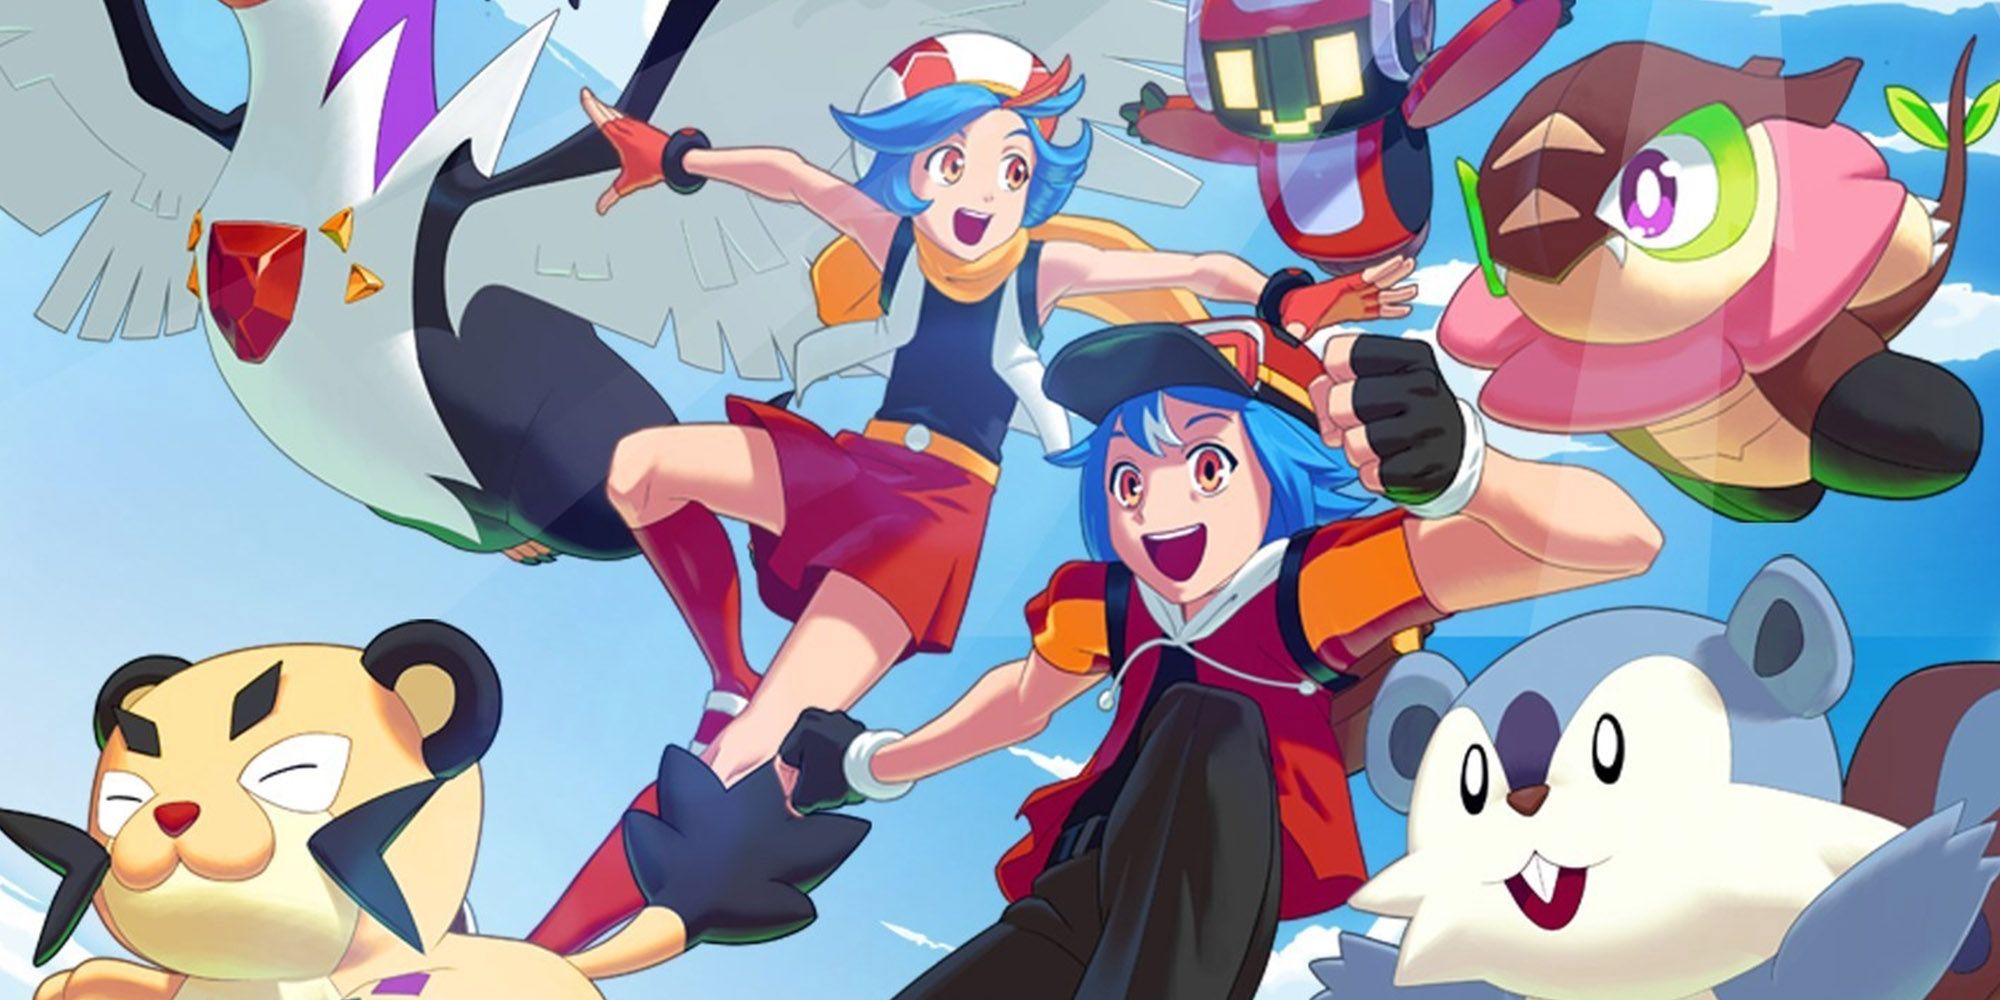 Nexomon Extinction Primary Promotional Art Showing Main Playable Characters And Some Sample Nexomon